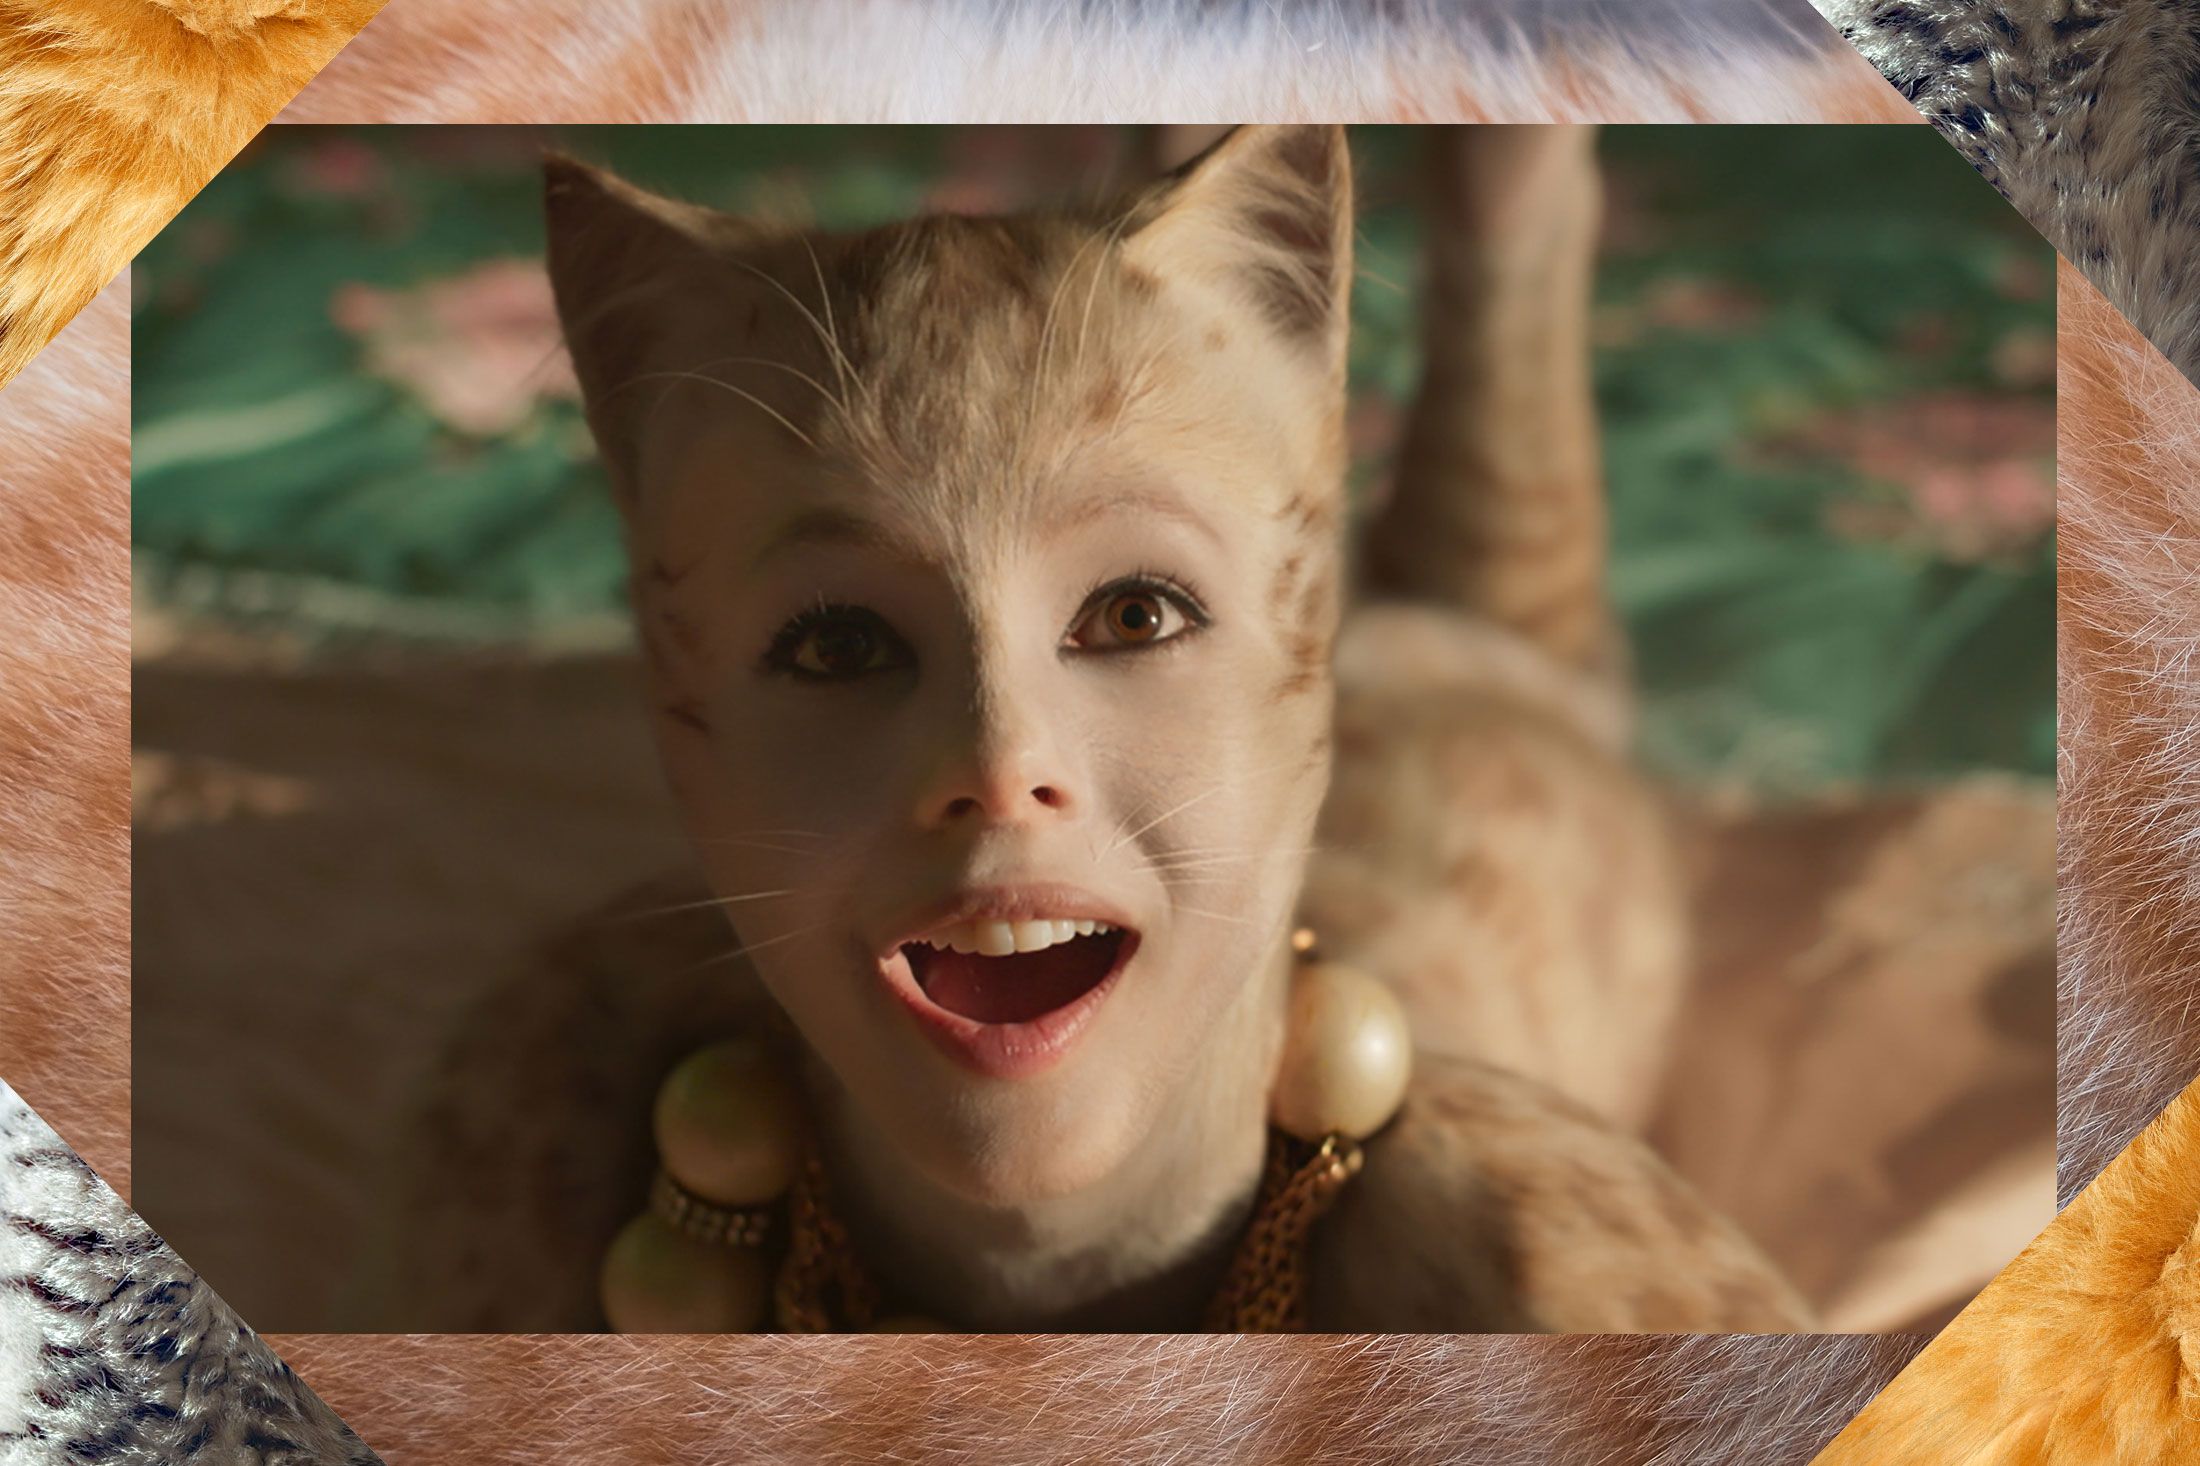 Cats,” Reviewed: It's Not Quite Weird Enough